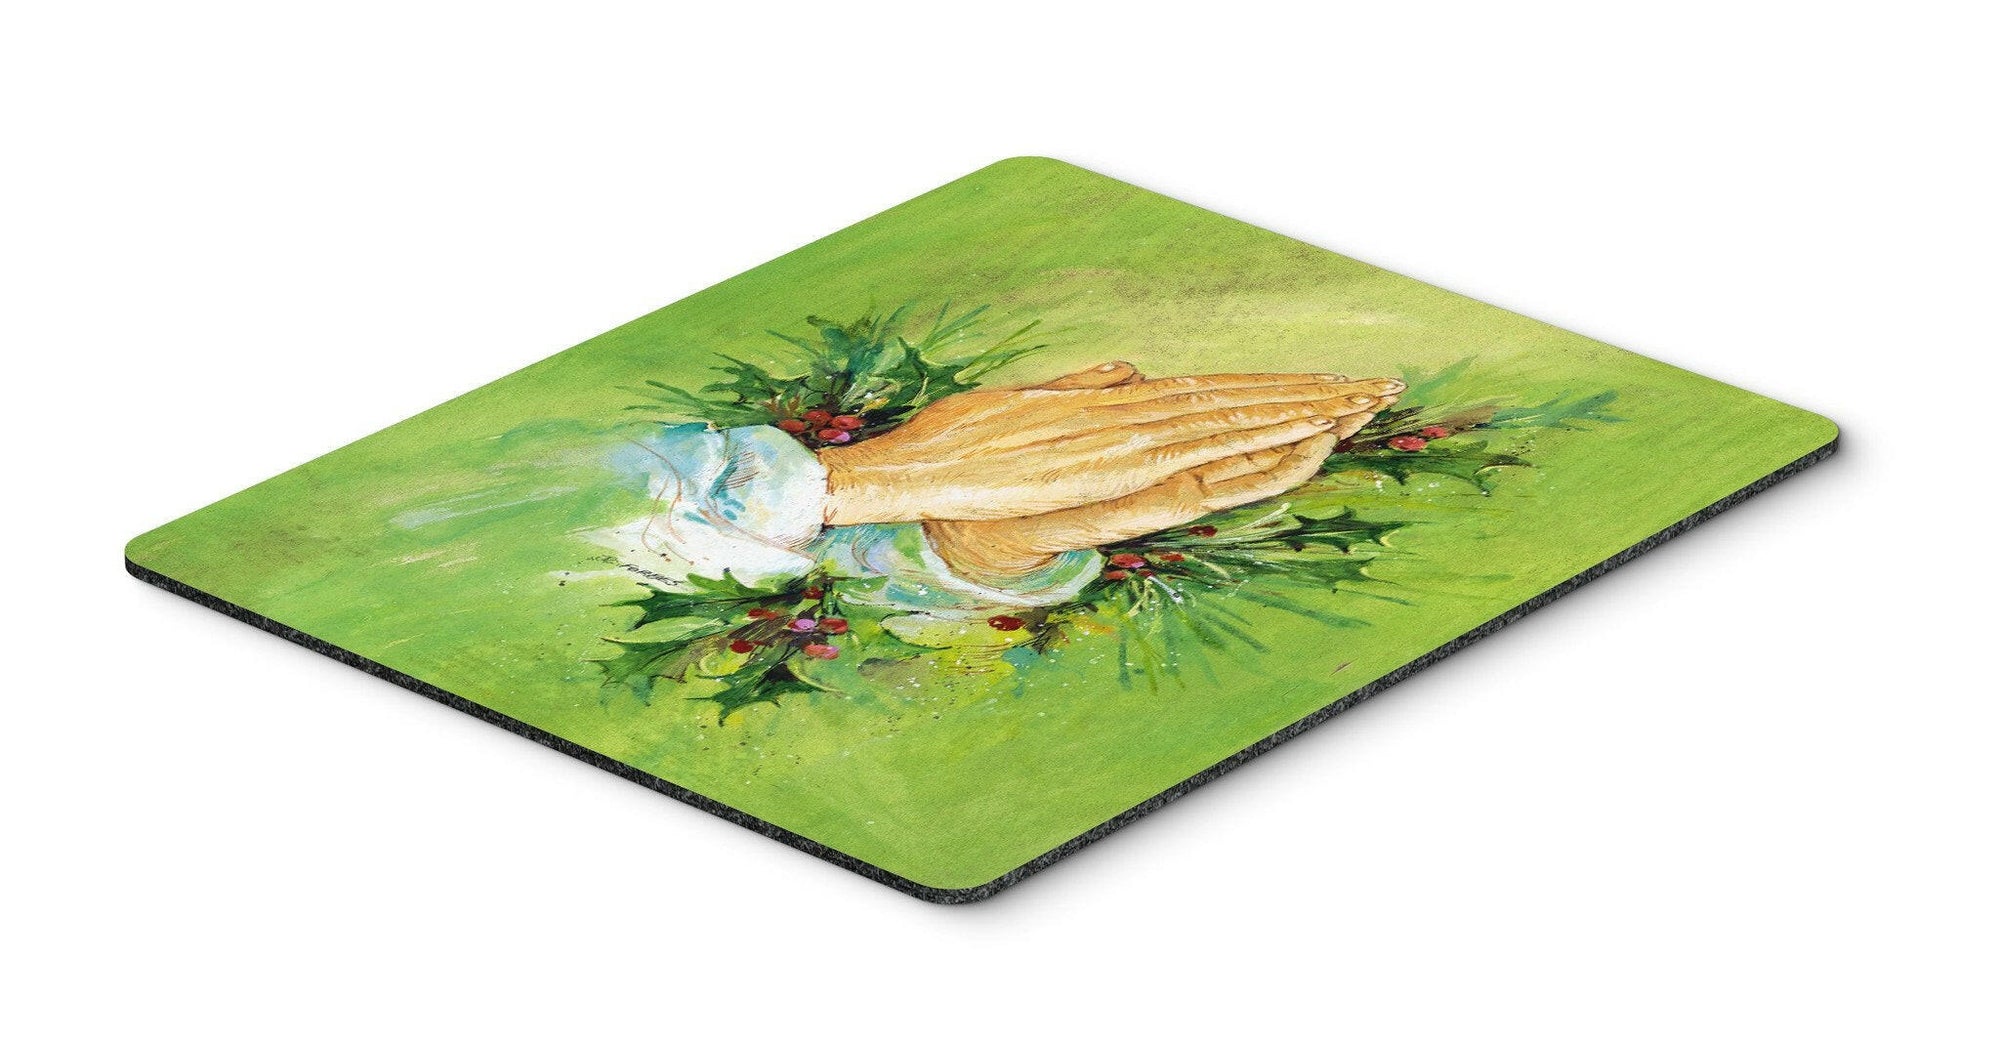 Praying Hangs with Holly Leaves Mouse Pad, Hot Pad or Trivet AAH5985MP by Caroline's Treasures